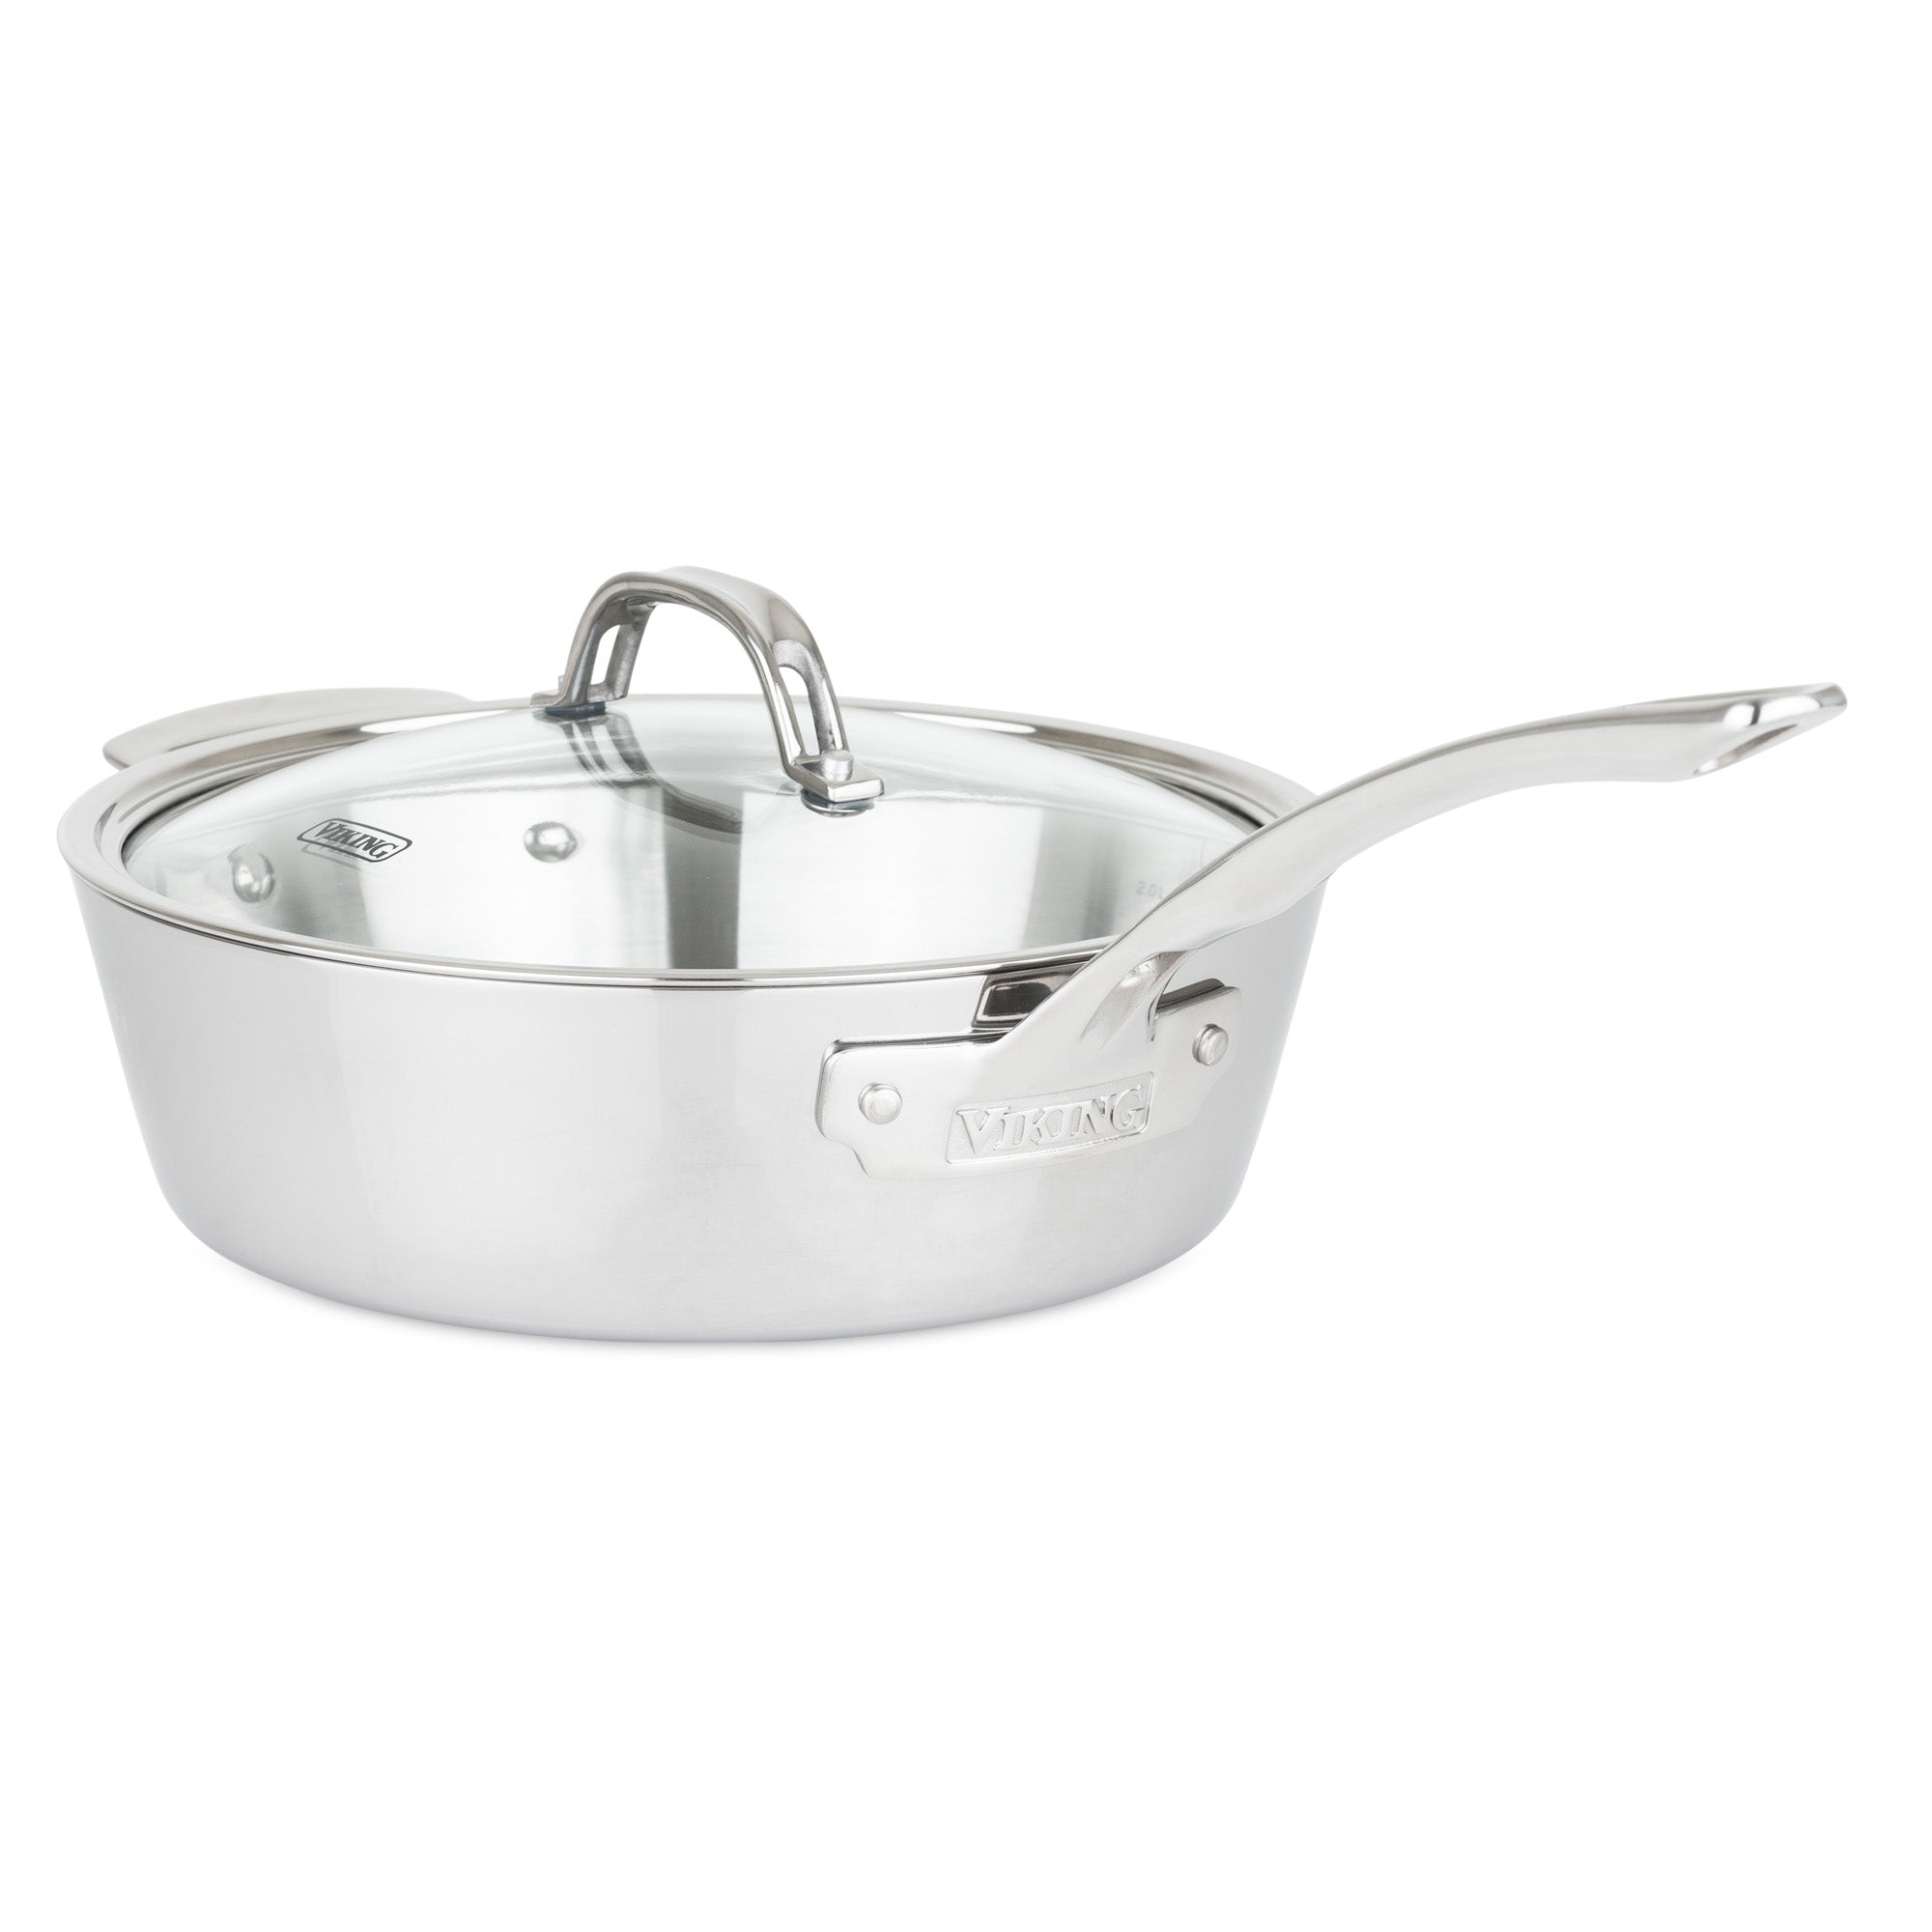 D3 Stainless 3-ply Bonded Cookware, Deep Saute Pan with lid, 6 quart